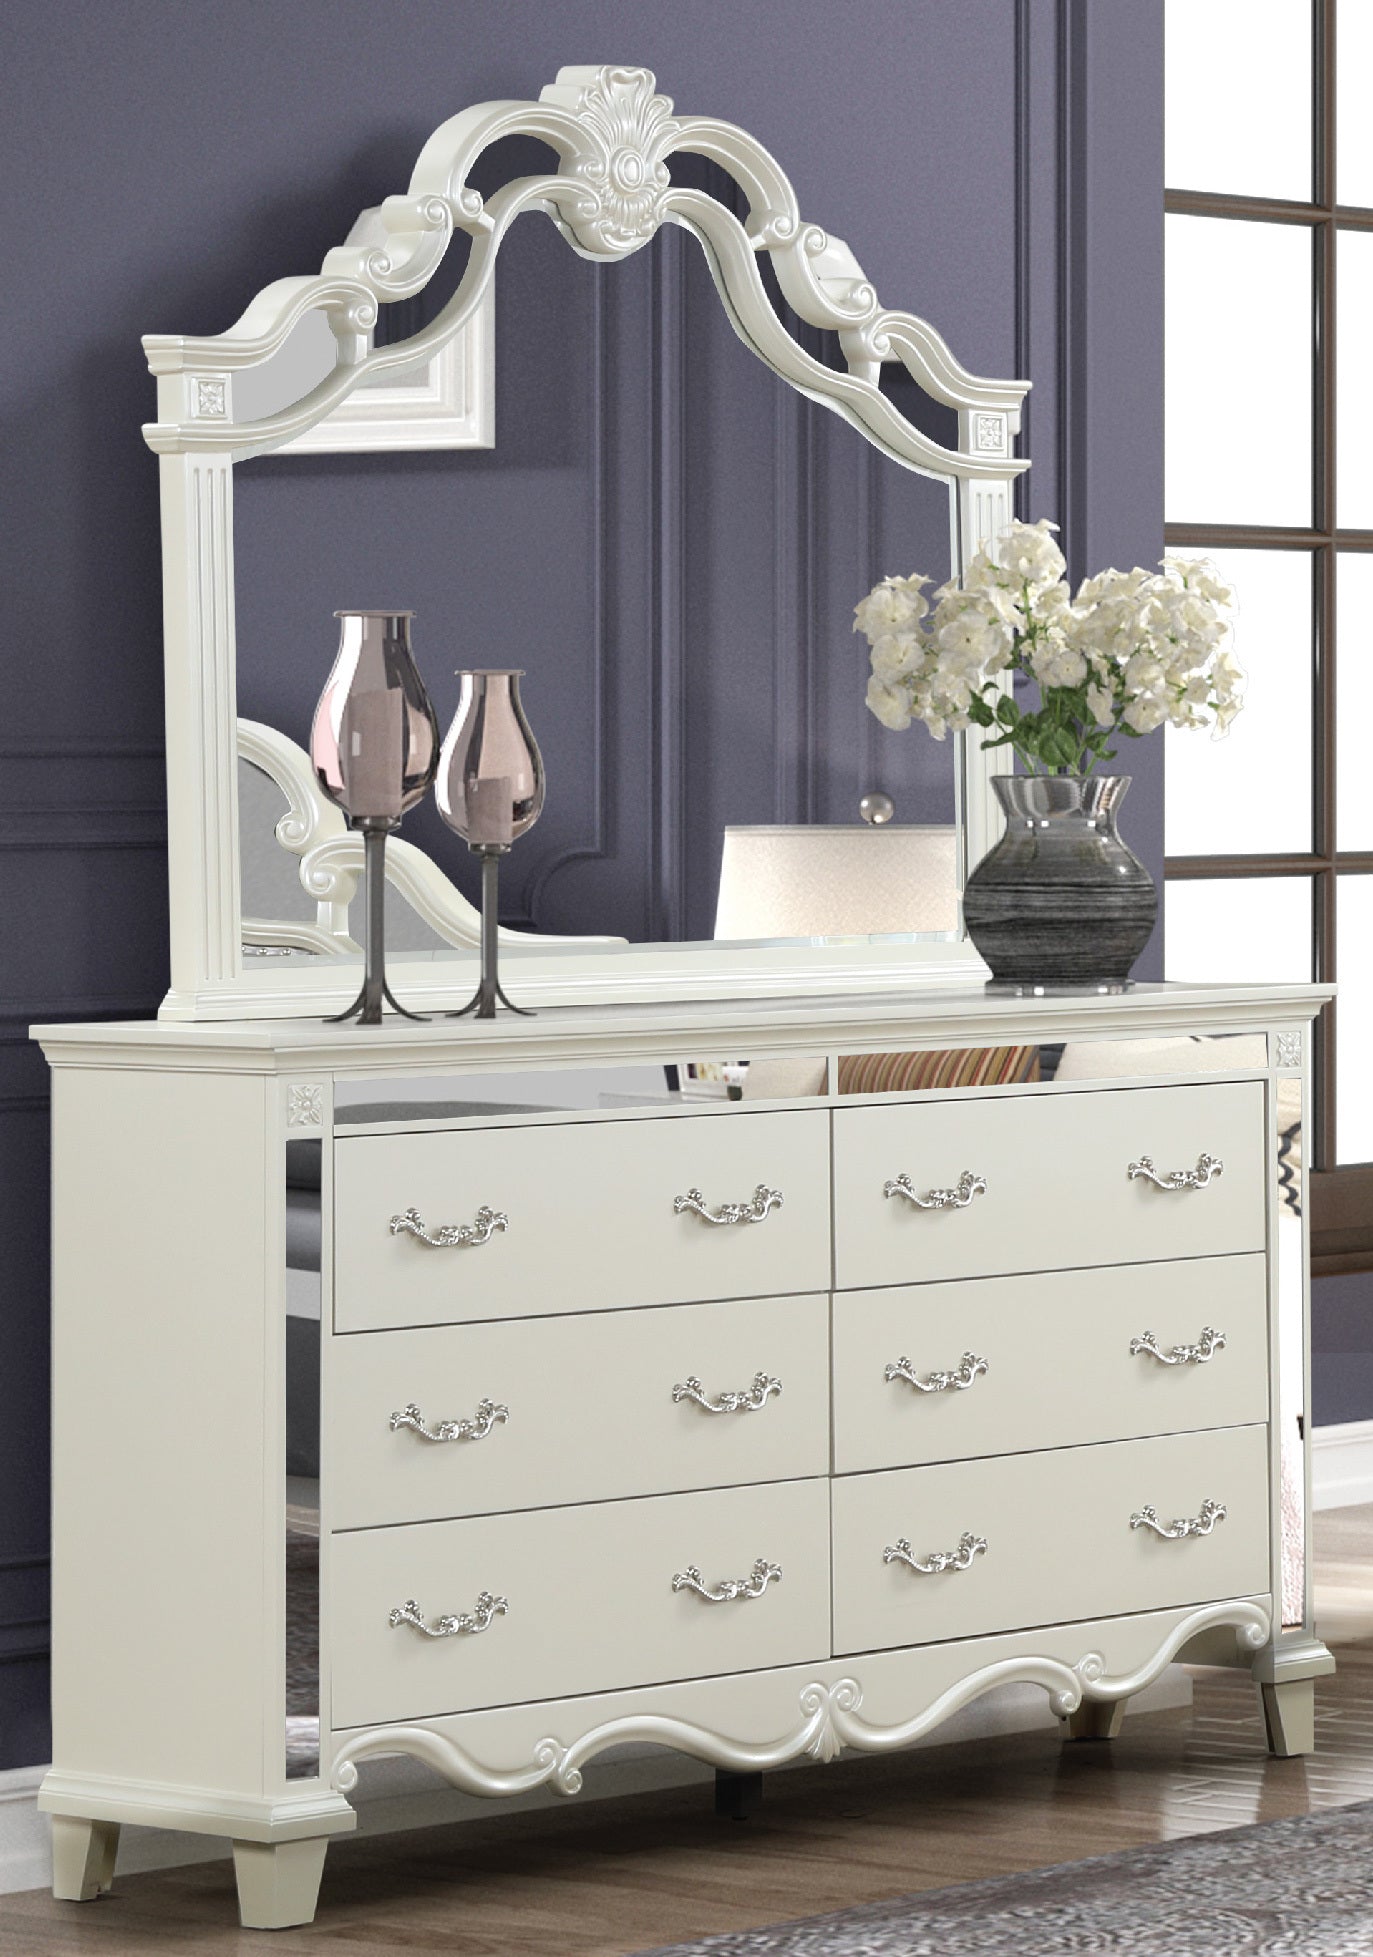 Milan Mirror Framed Dresser made with Wood in